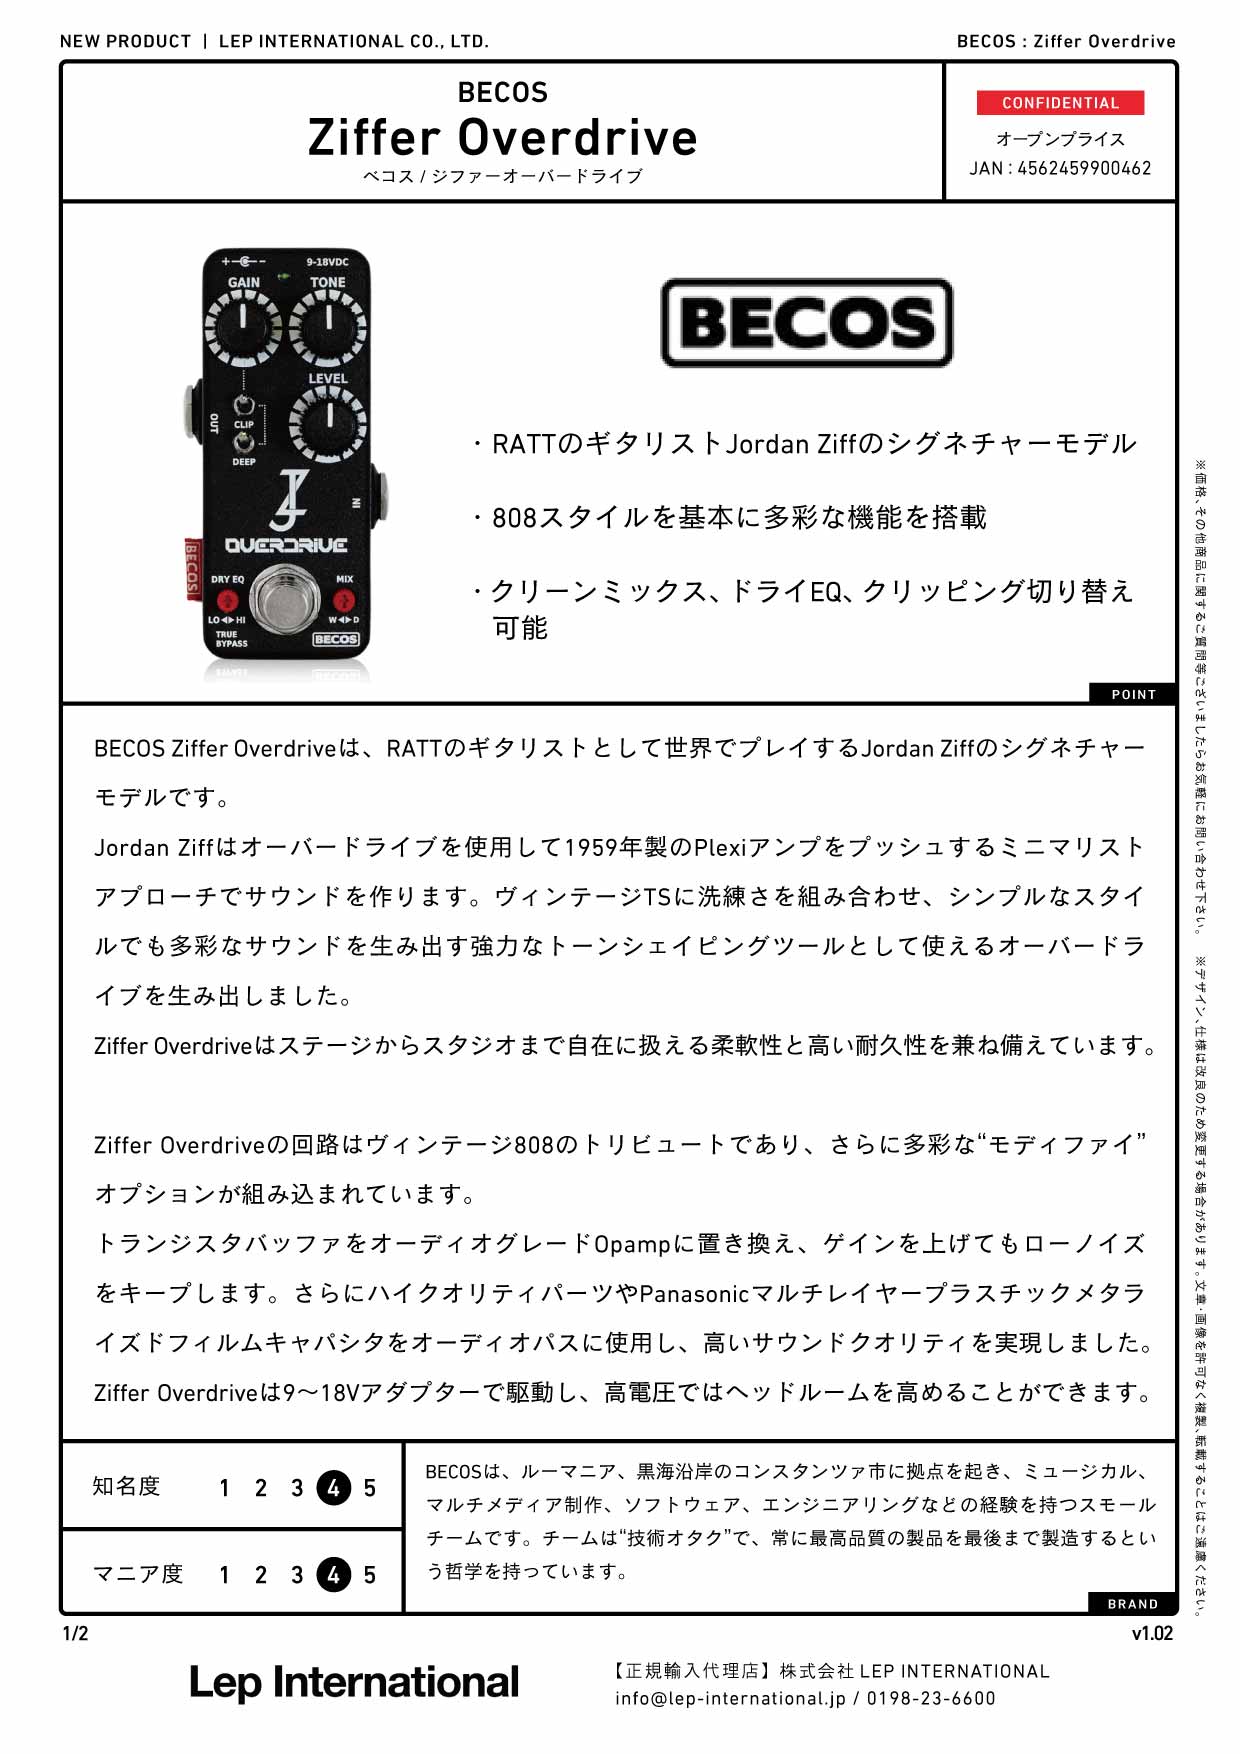 BECOS/Ziffer Overdrive